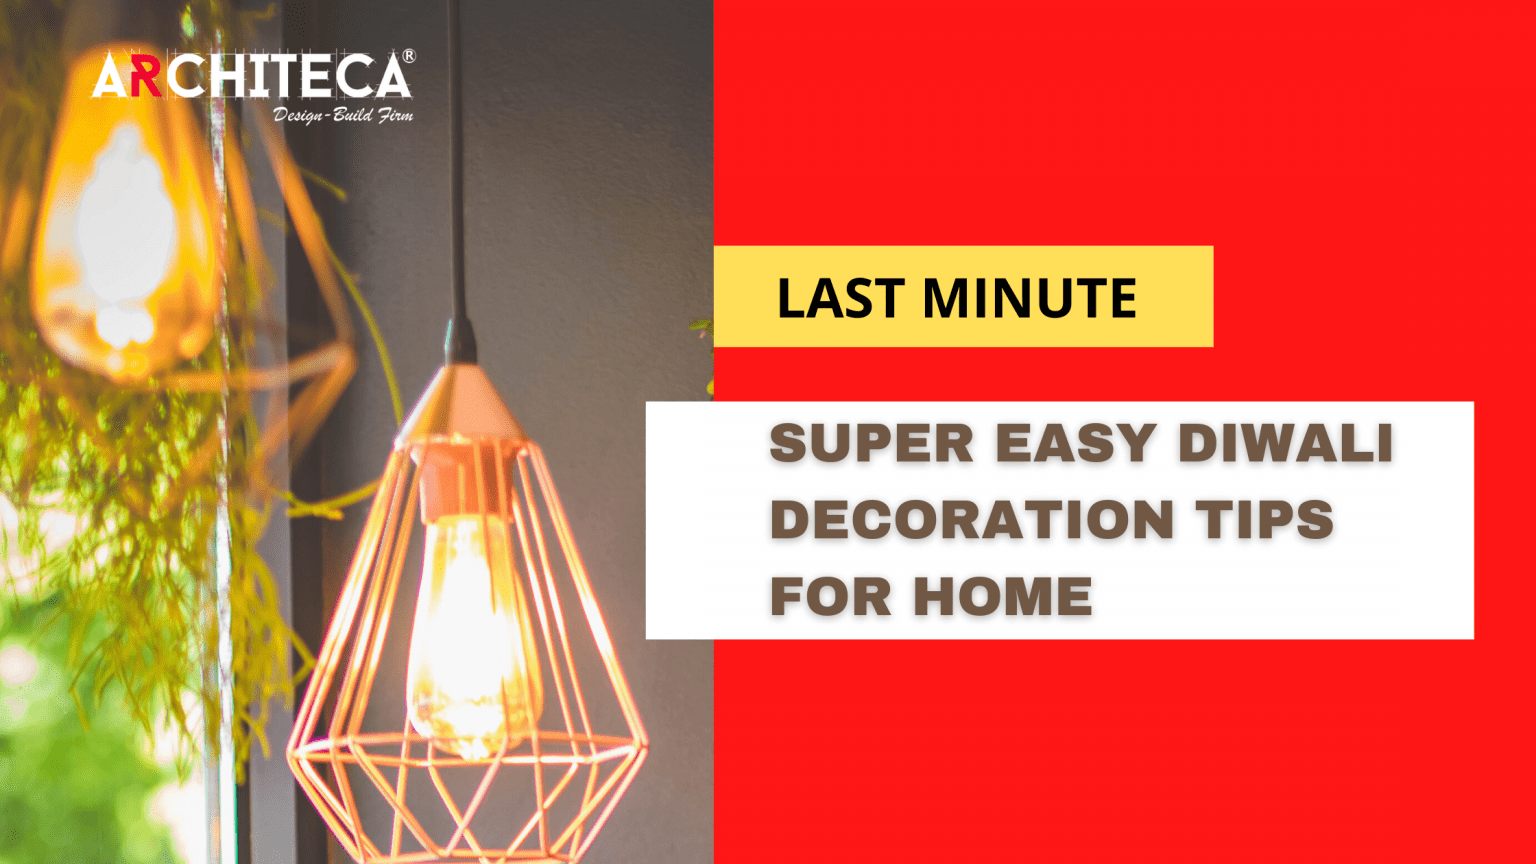 Makeup Review & Beauty Blog : EASY DIWALI DECORATION IDEAS FOR YOUR HOME